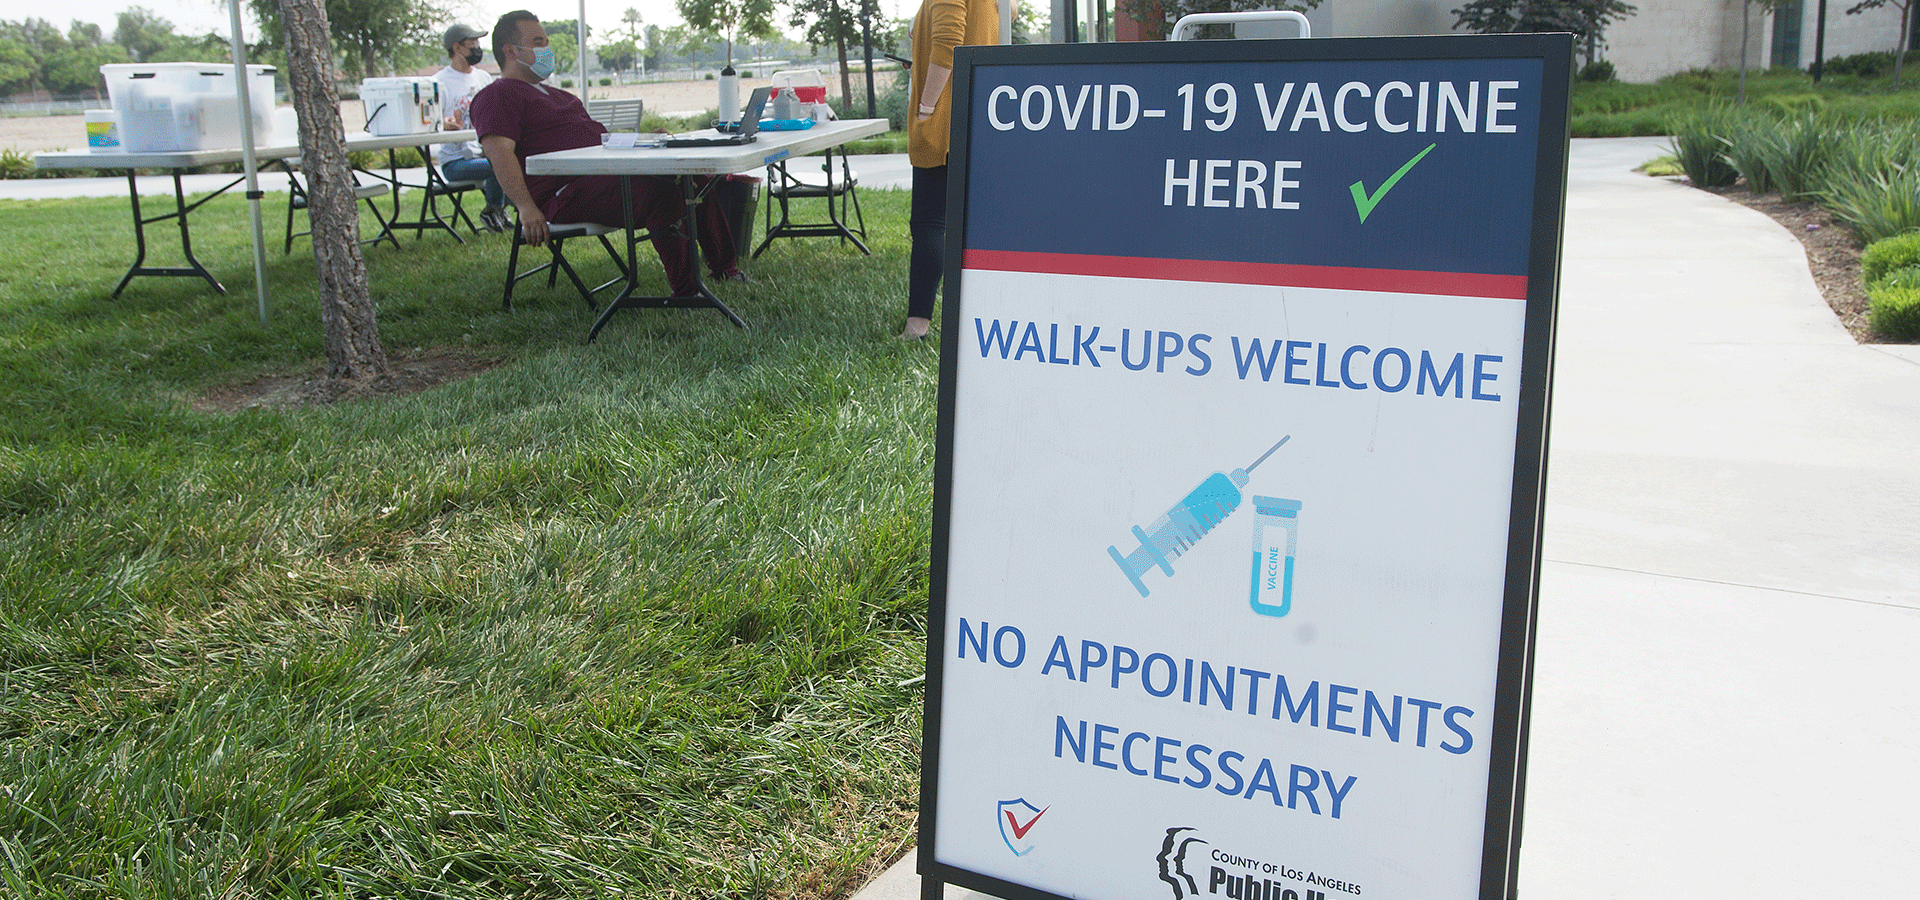 Outdoor vaccine clinic pop-up site at CPP.